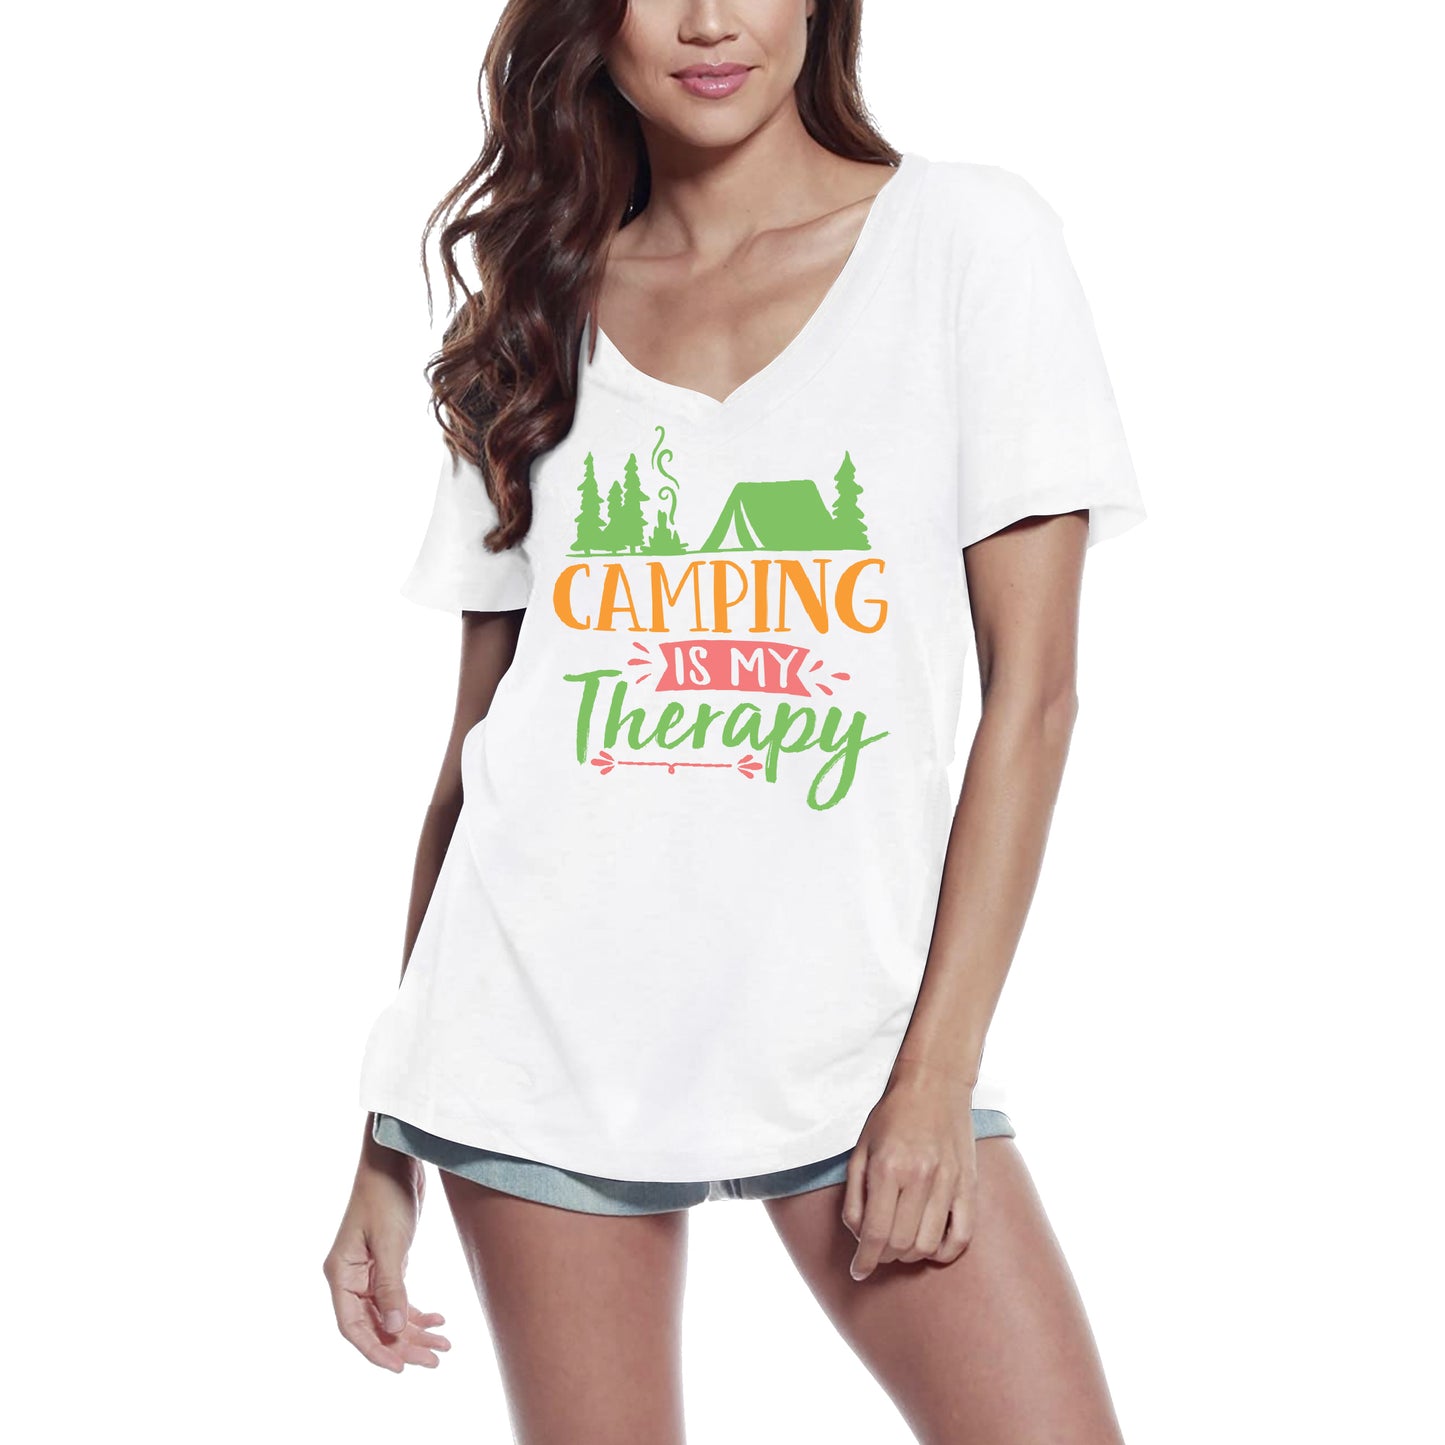 ULTRABASIC Women's T-Shirt Camping is My Therapy - Adventure Short Sleeve Tee Shirt Tops